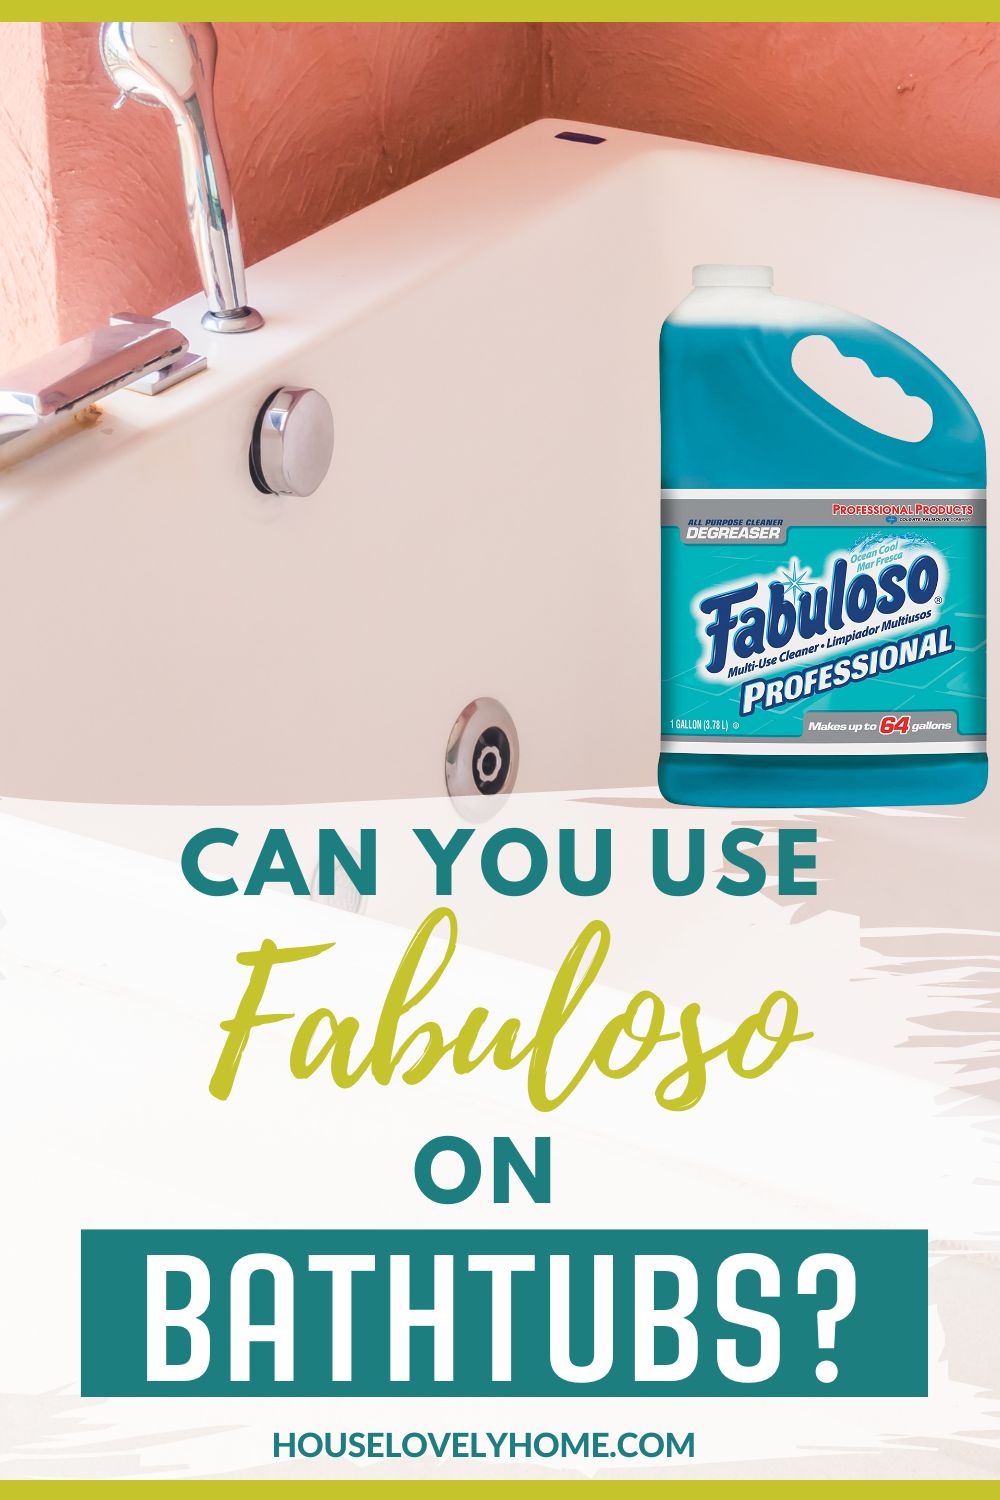 Image showing a bathtub, an overlay of a blue gallon, and a text overlay that reads Can you use Fabuloso on bathtubs